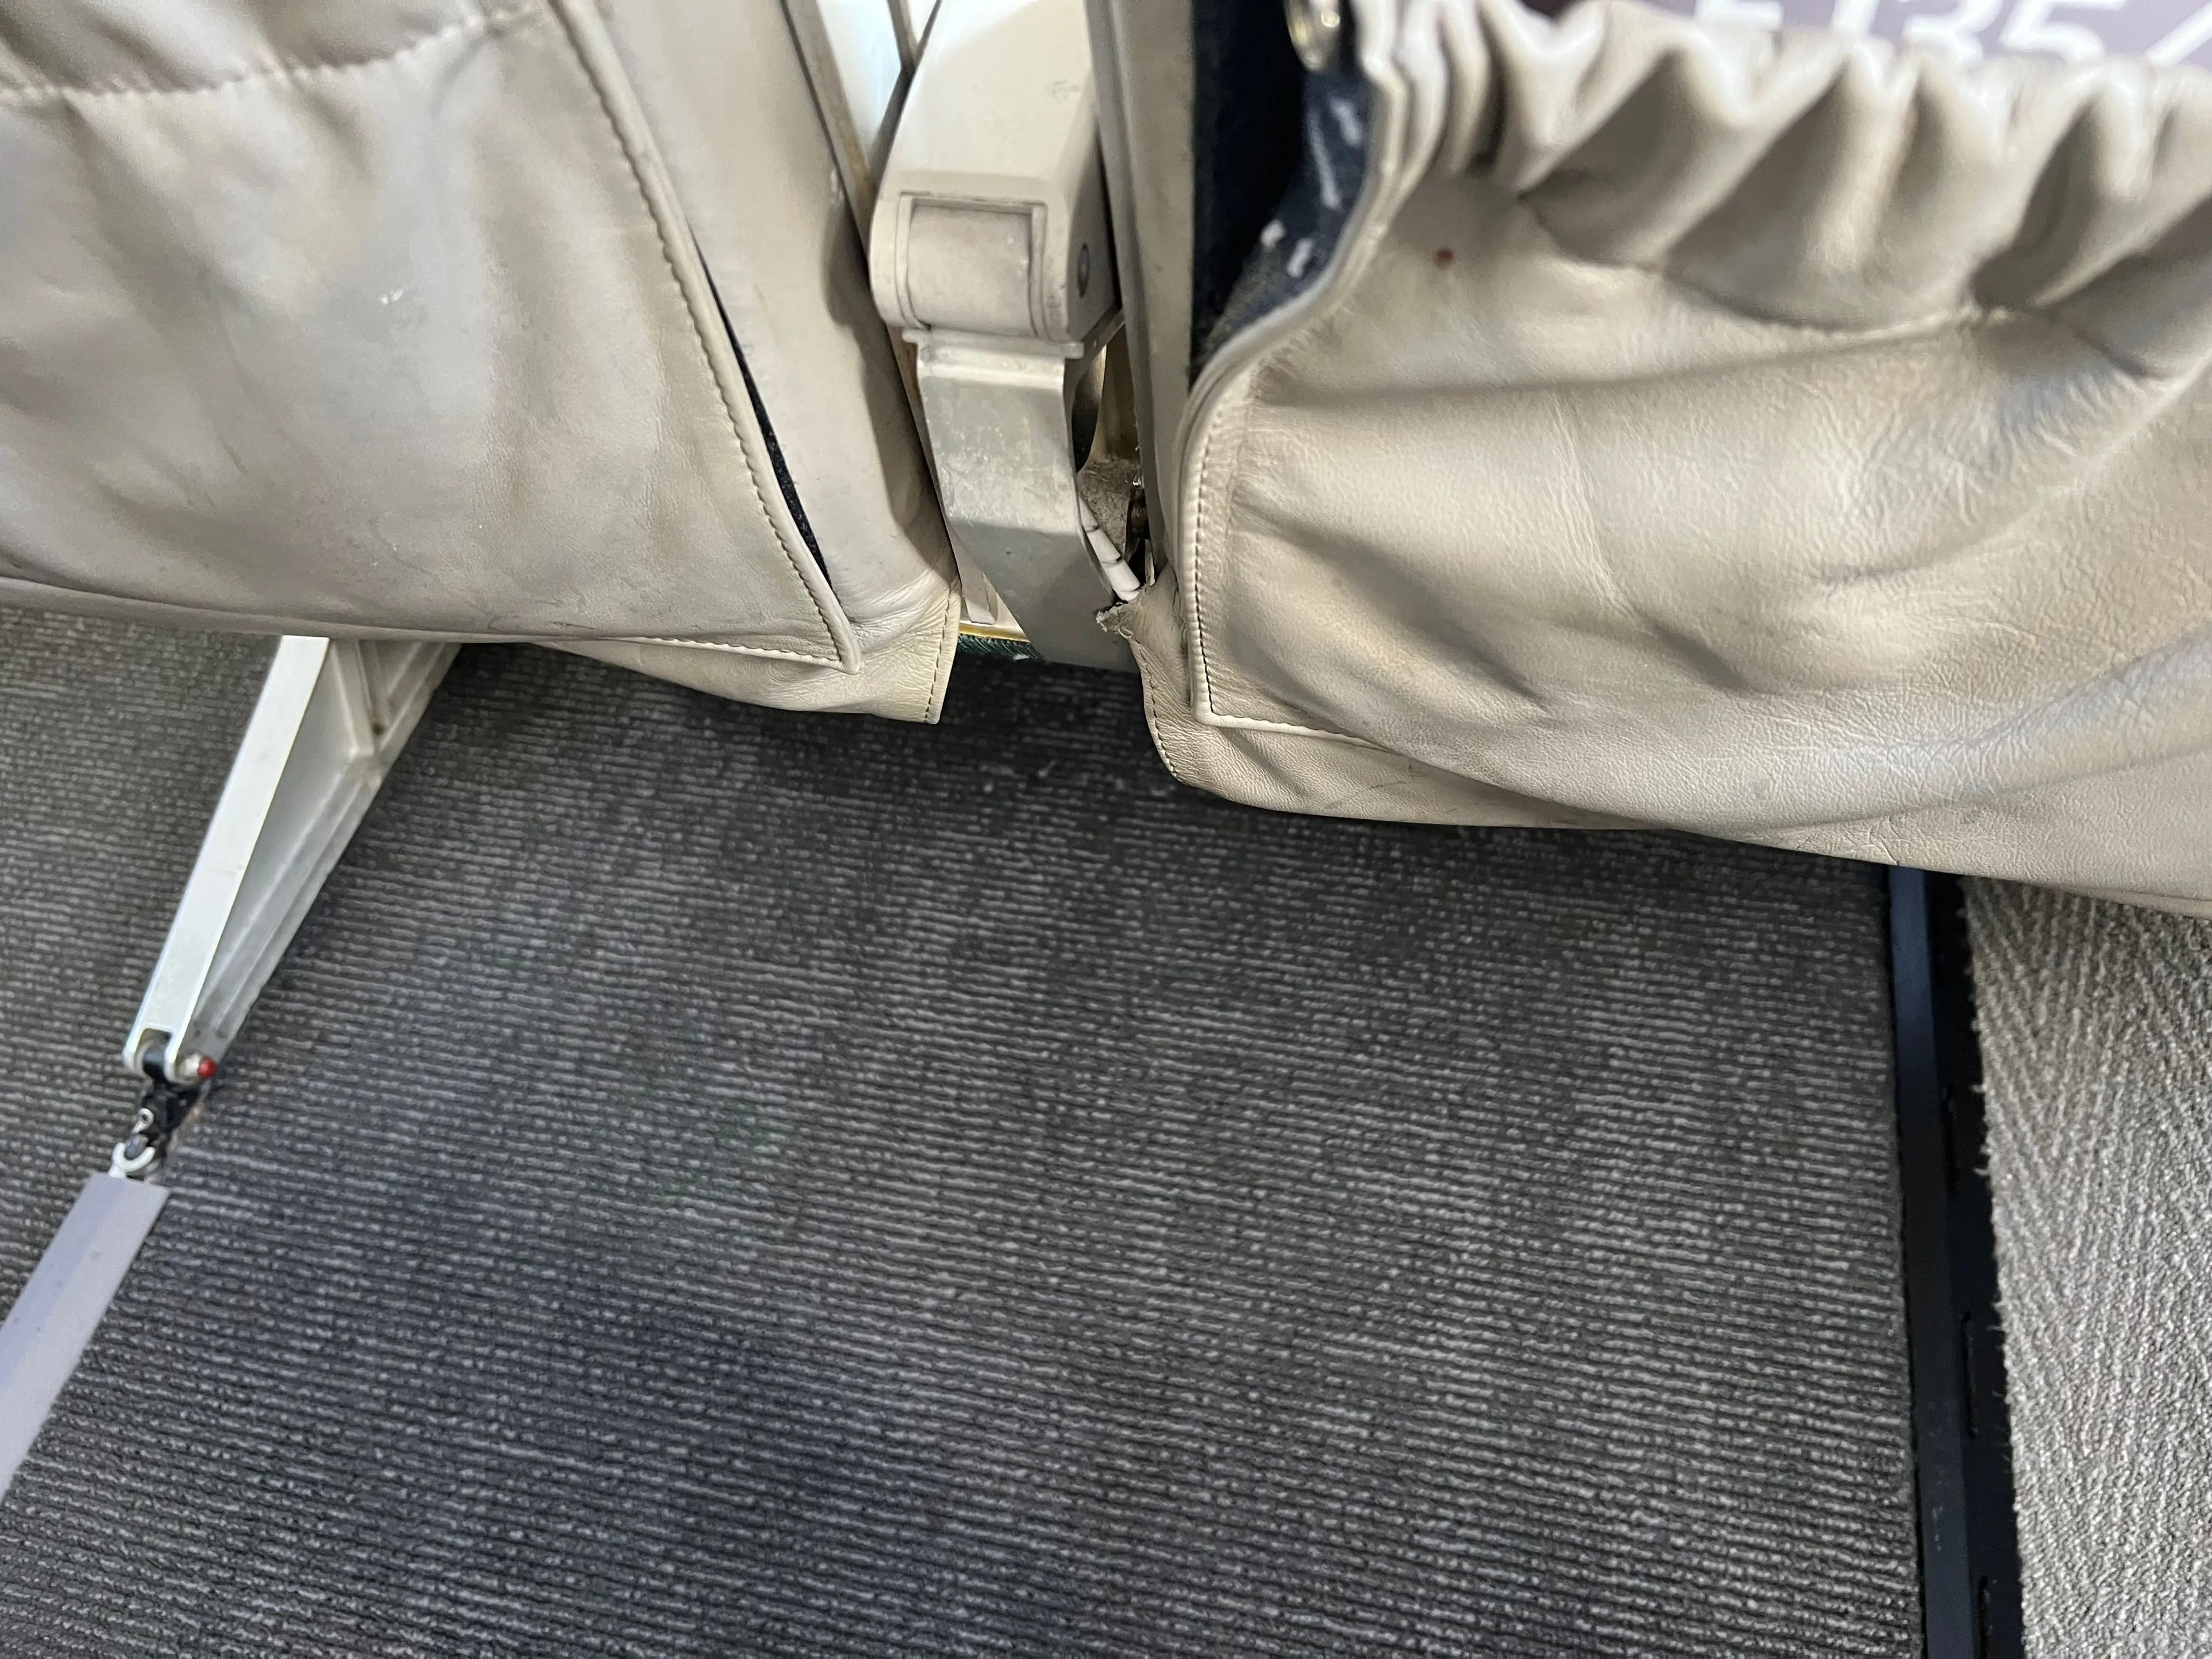 The space under the set of dual-seats on the JSX plane.